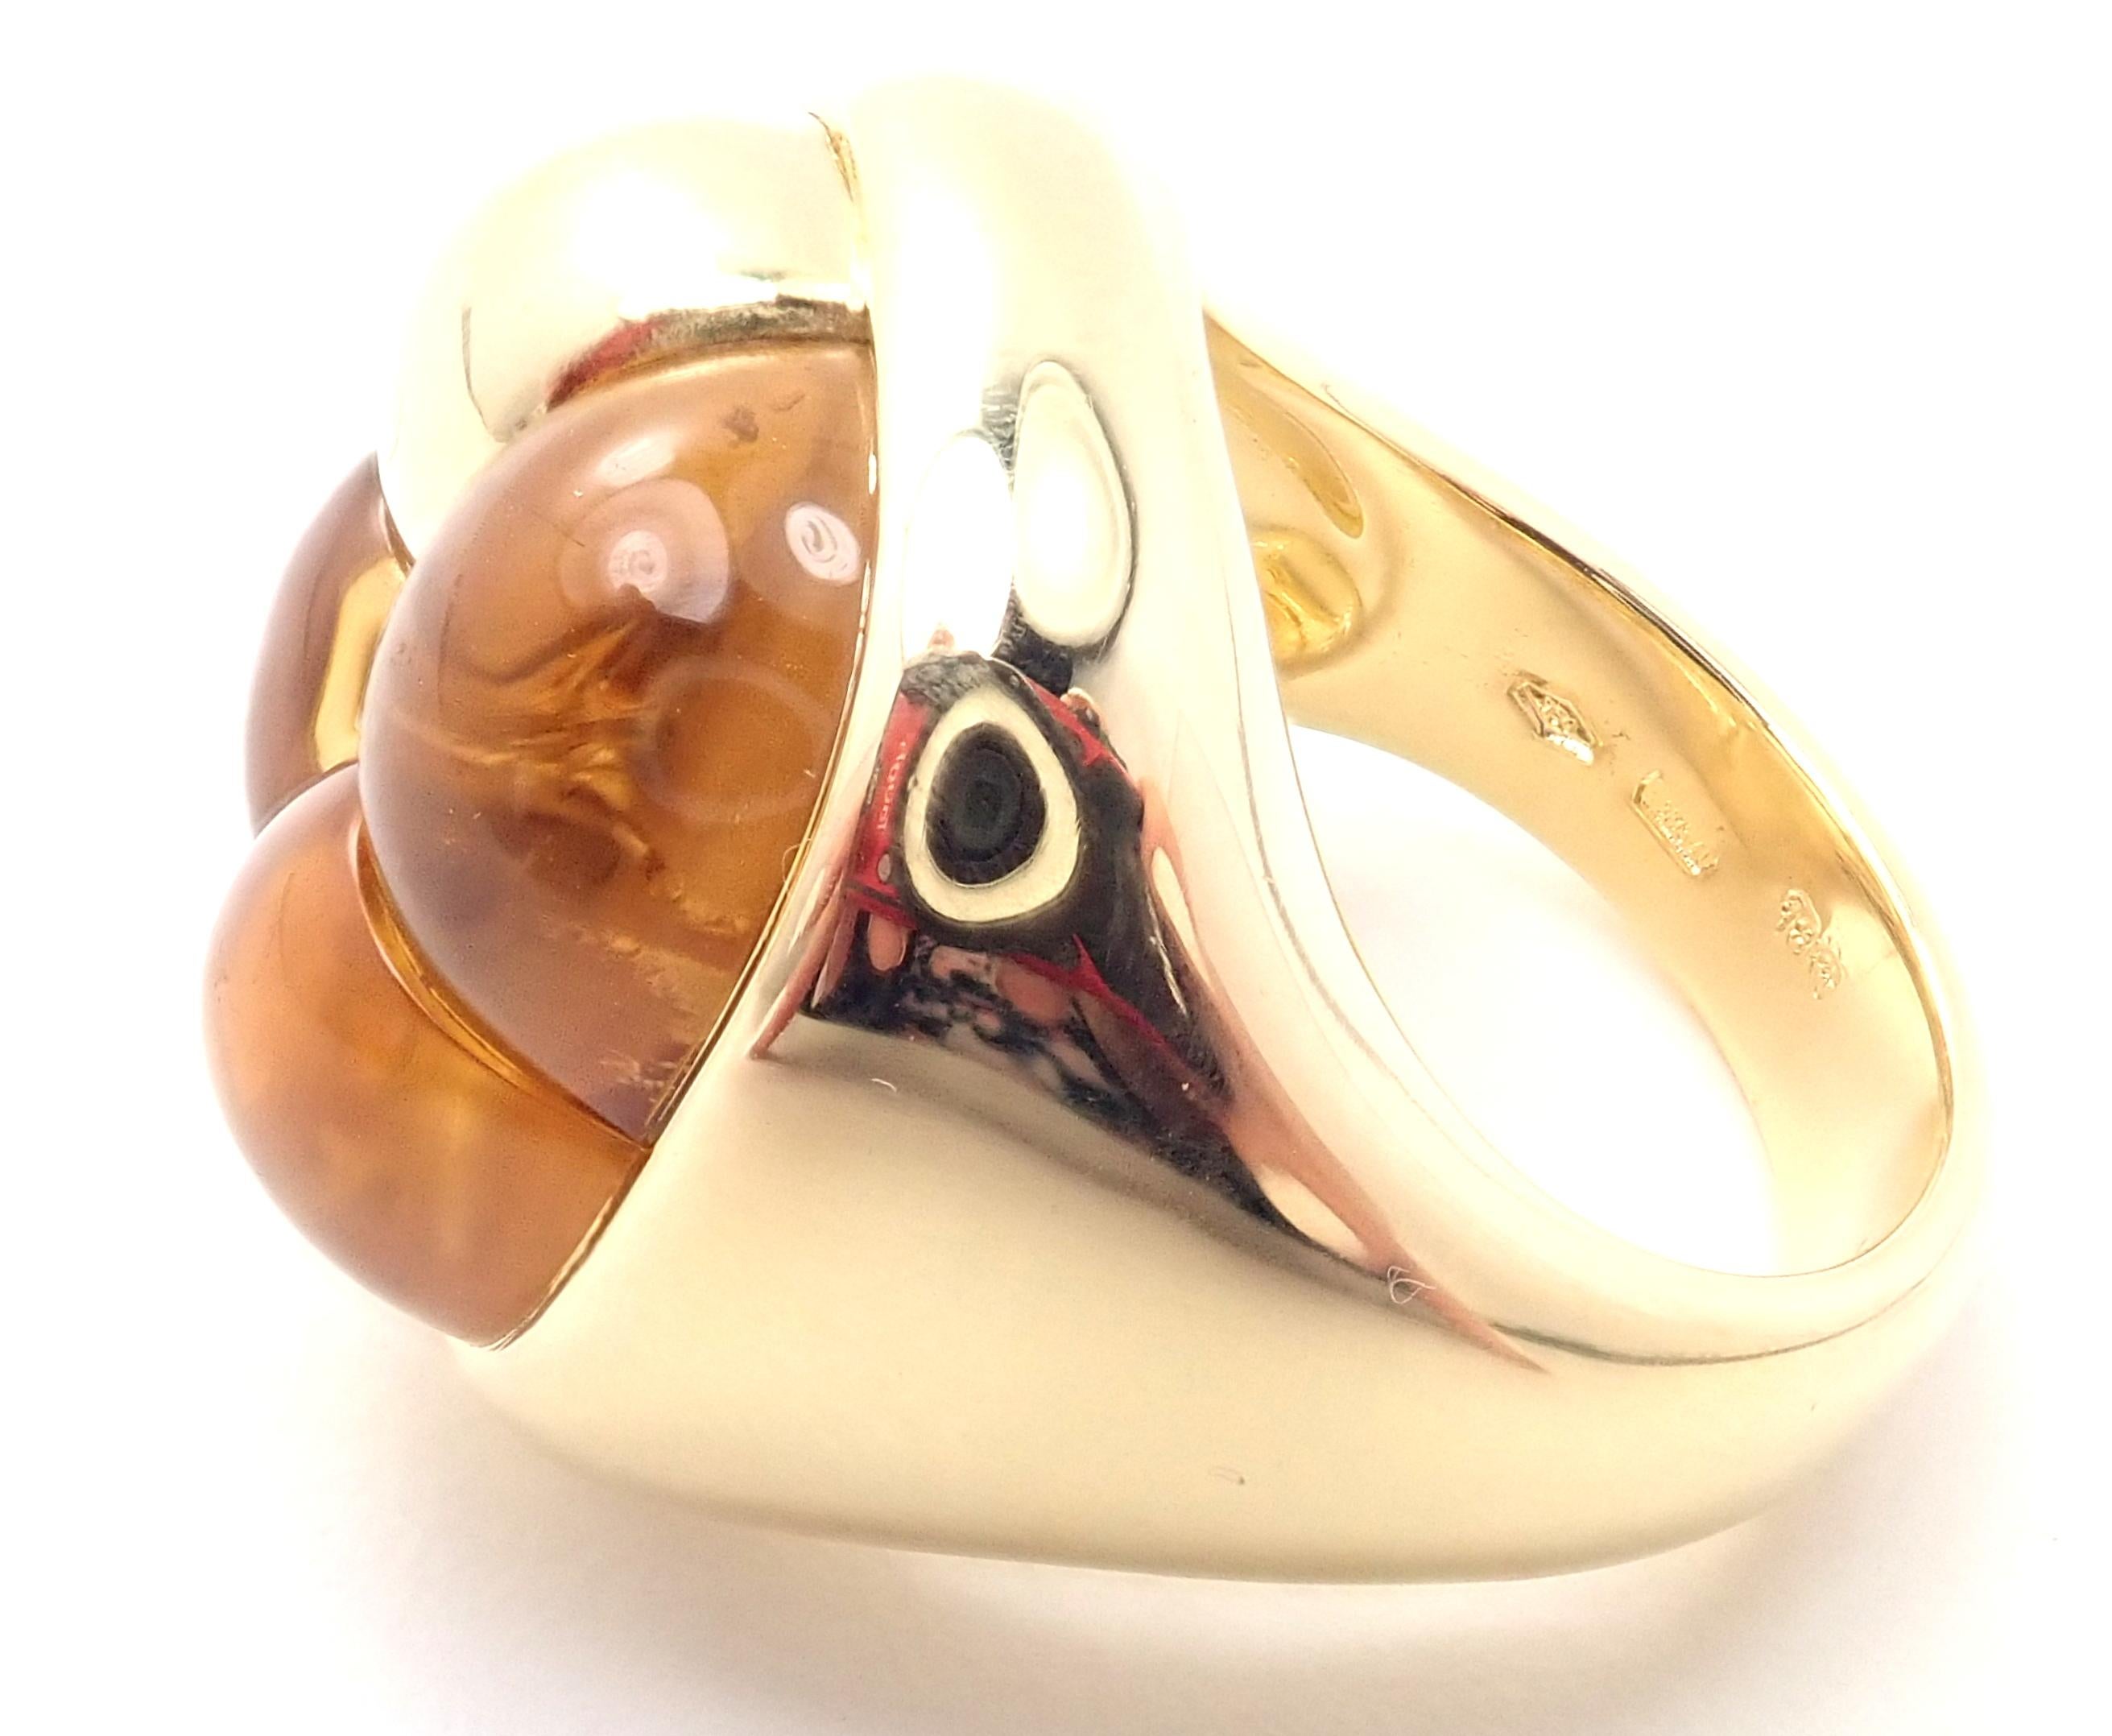 18k Yellow Gold Citrine Large Ring by Pomellato.
With 3 citrine stones.
Details: 
Weight: 28.6 grams
Ring Size: 6.5
Width: 21mm to 6mm
Stamped Hallmarks: Pomellato 750 
*Free Shipping within the United States*
YOUR PRICE: $4,450
T2822oodd